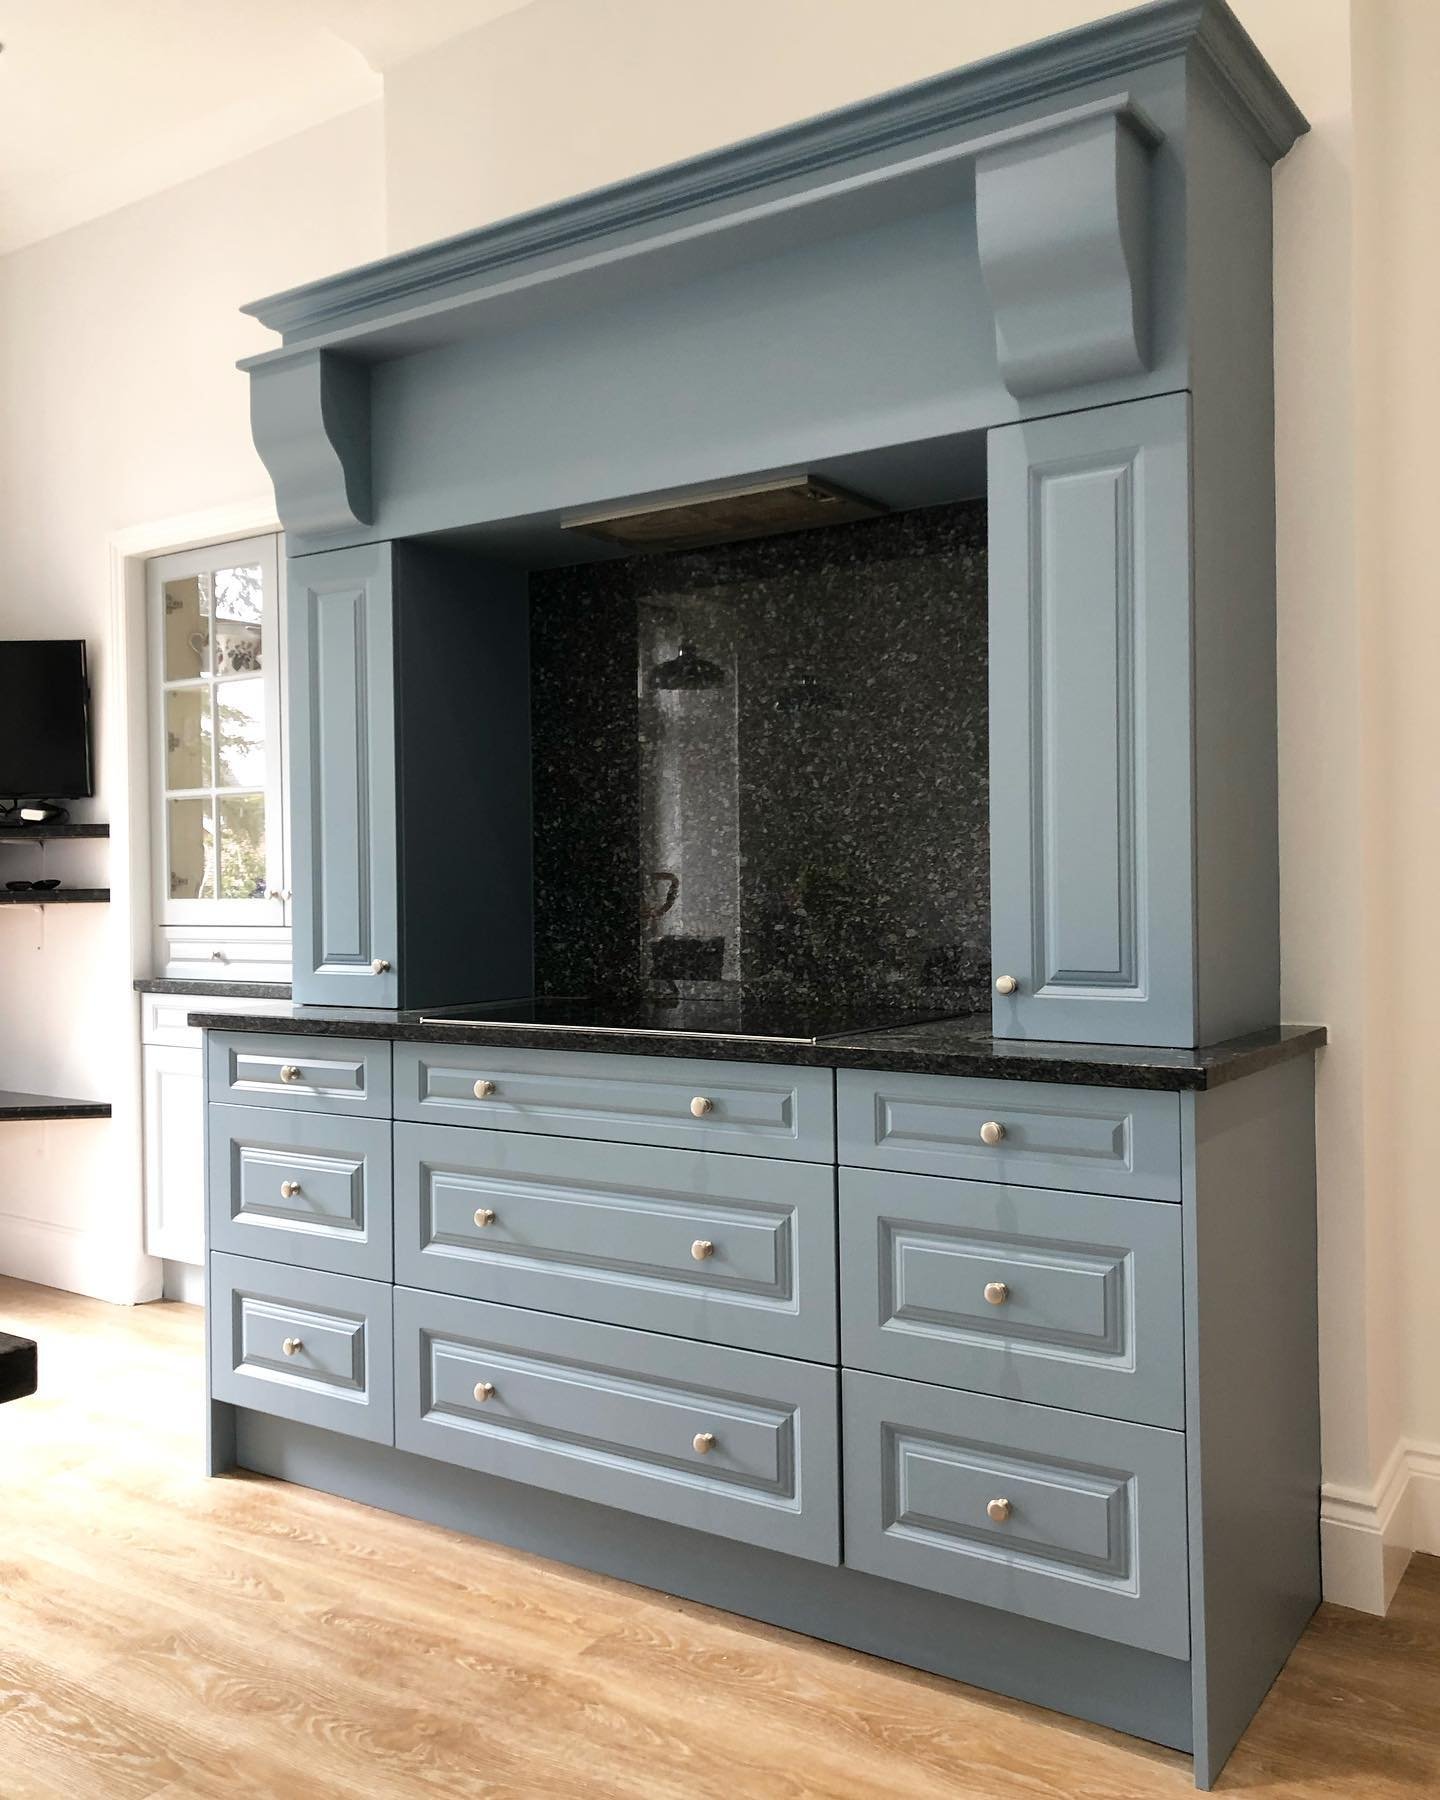 This kitchen was in need of a touch of colour! (Swipe to see before) I recommended this @littlegreene Grey Stone shade to my client, it&rsquo;s in keeping with the traditional style of the rest of their home but still brings a bit of warmth and inter